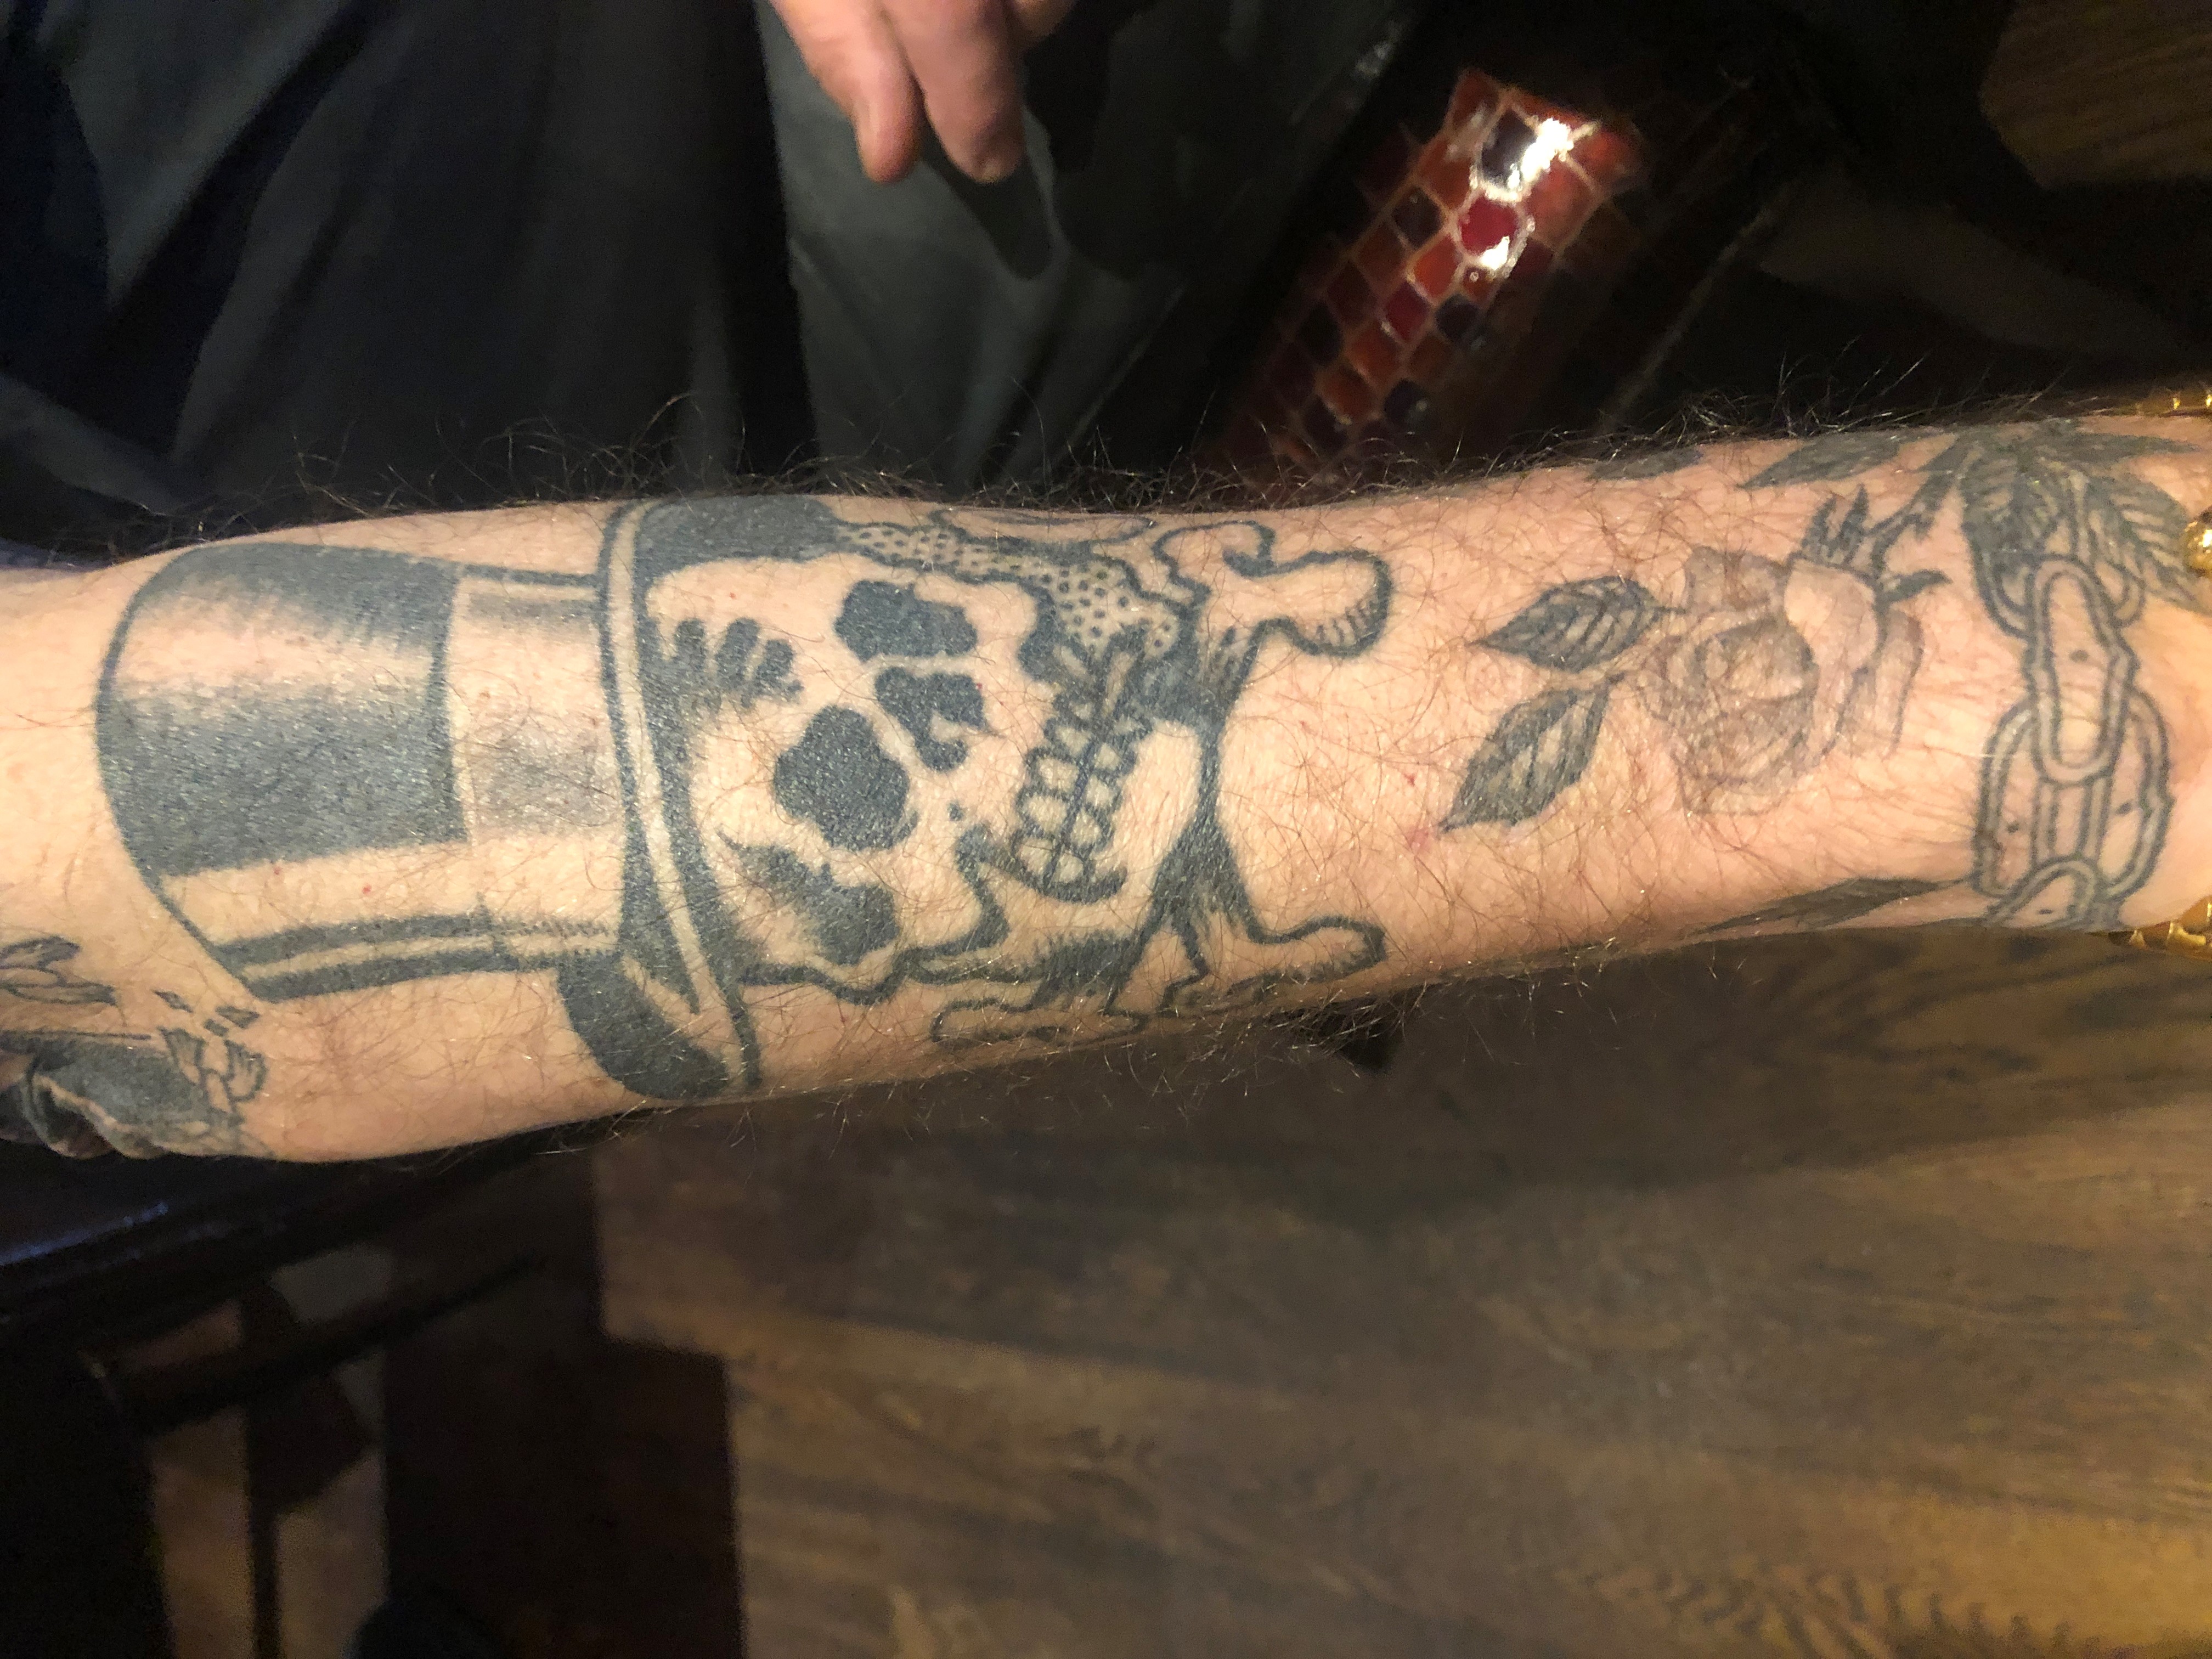 The picture from Mark of his arm